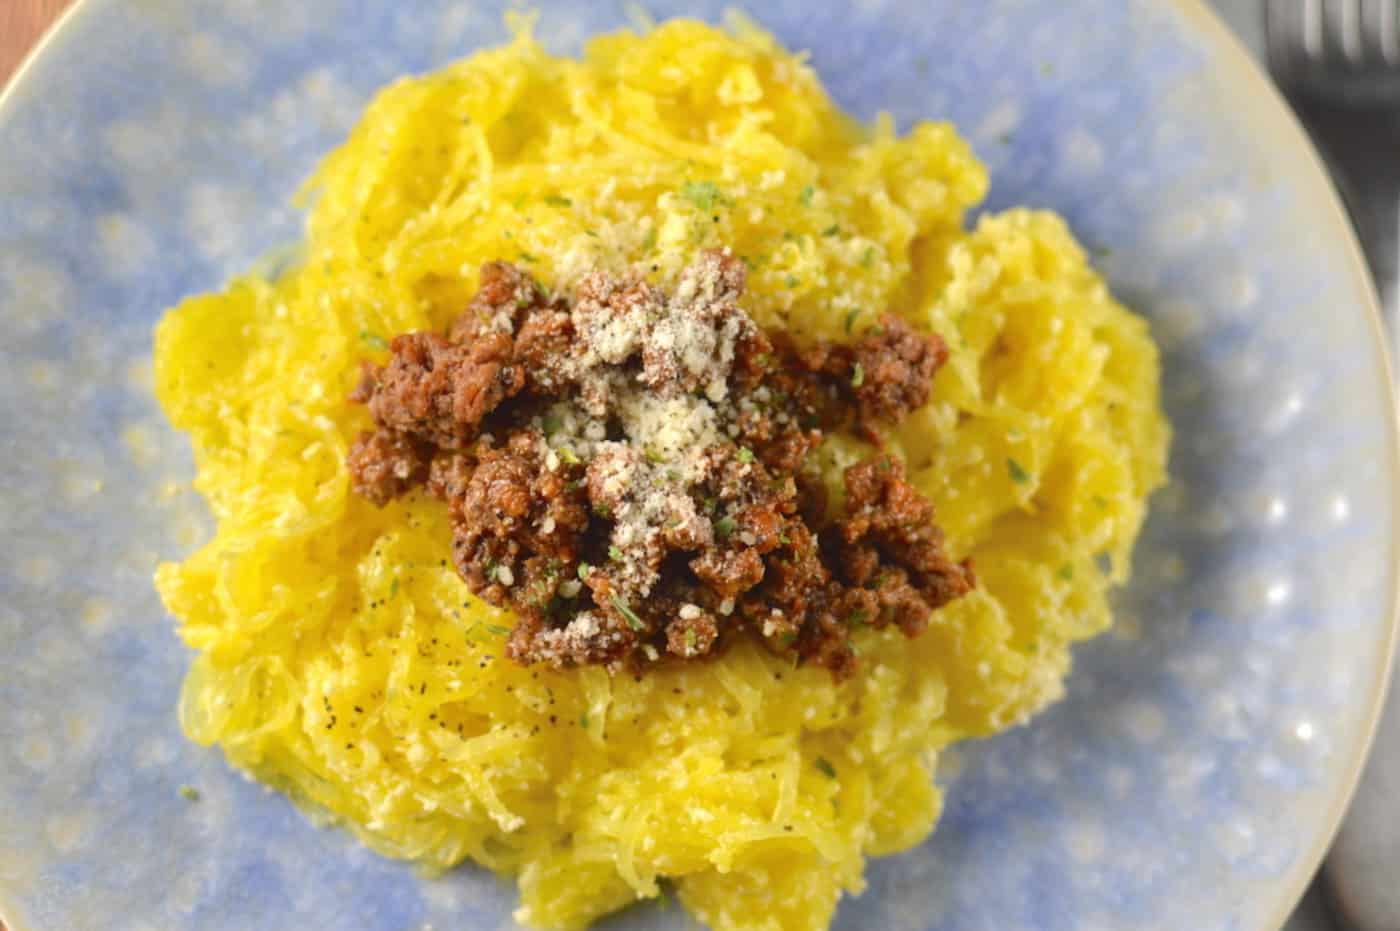 Cooked spaghetti squash with meat tomato sauce and parmesan cheese